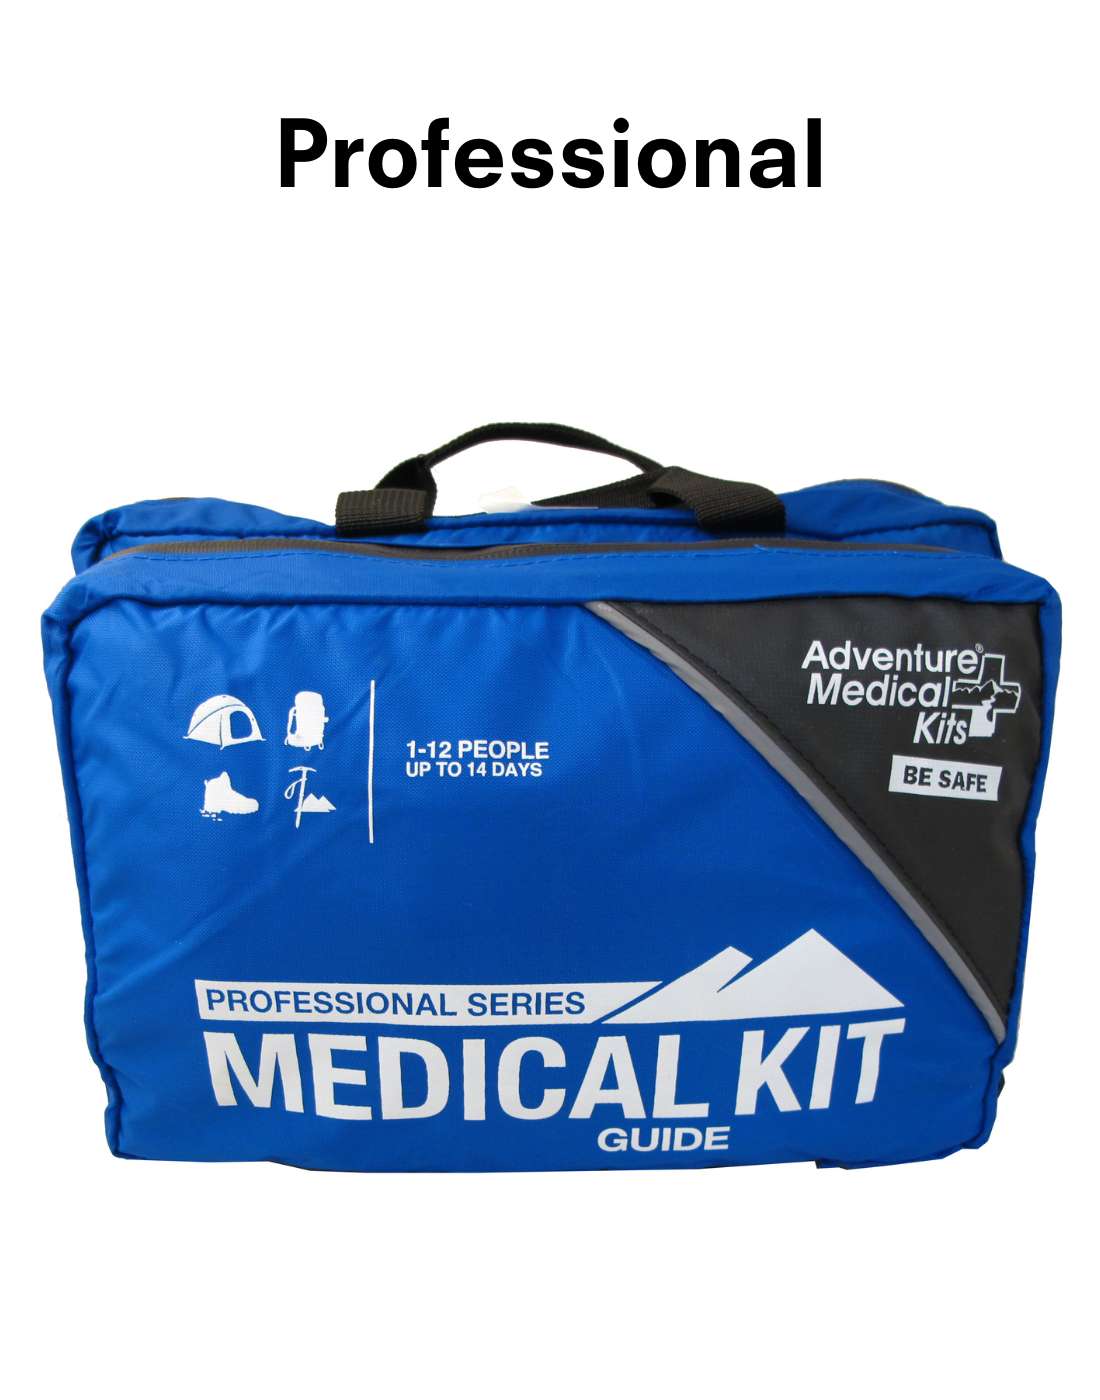 Professional Guide Kit